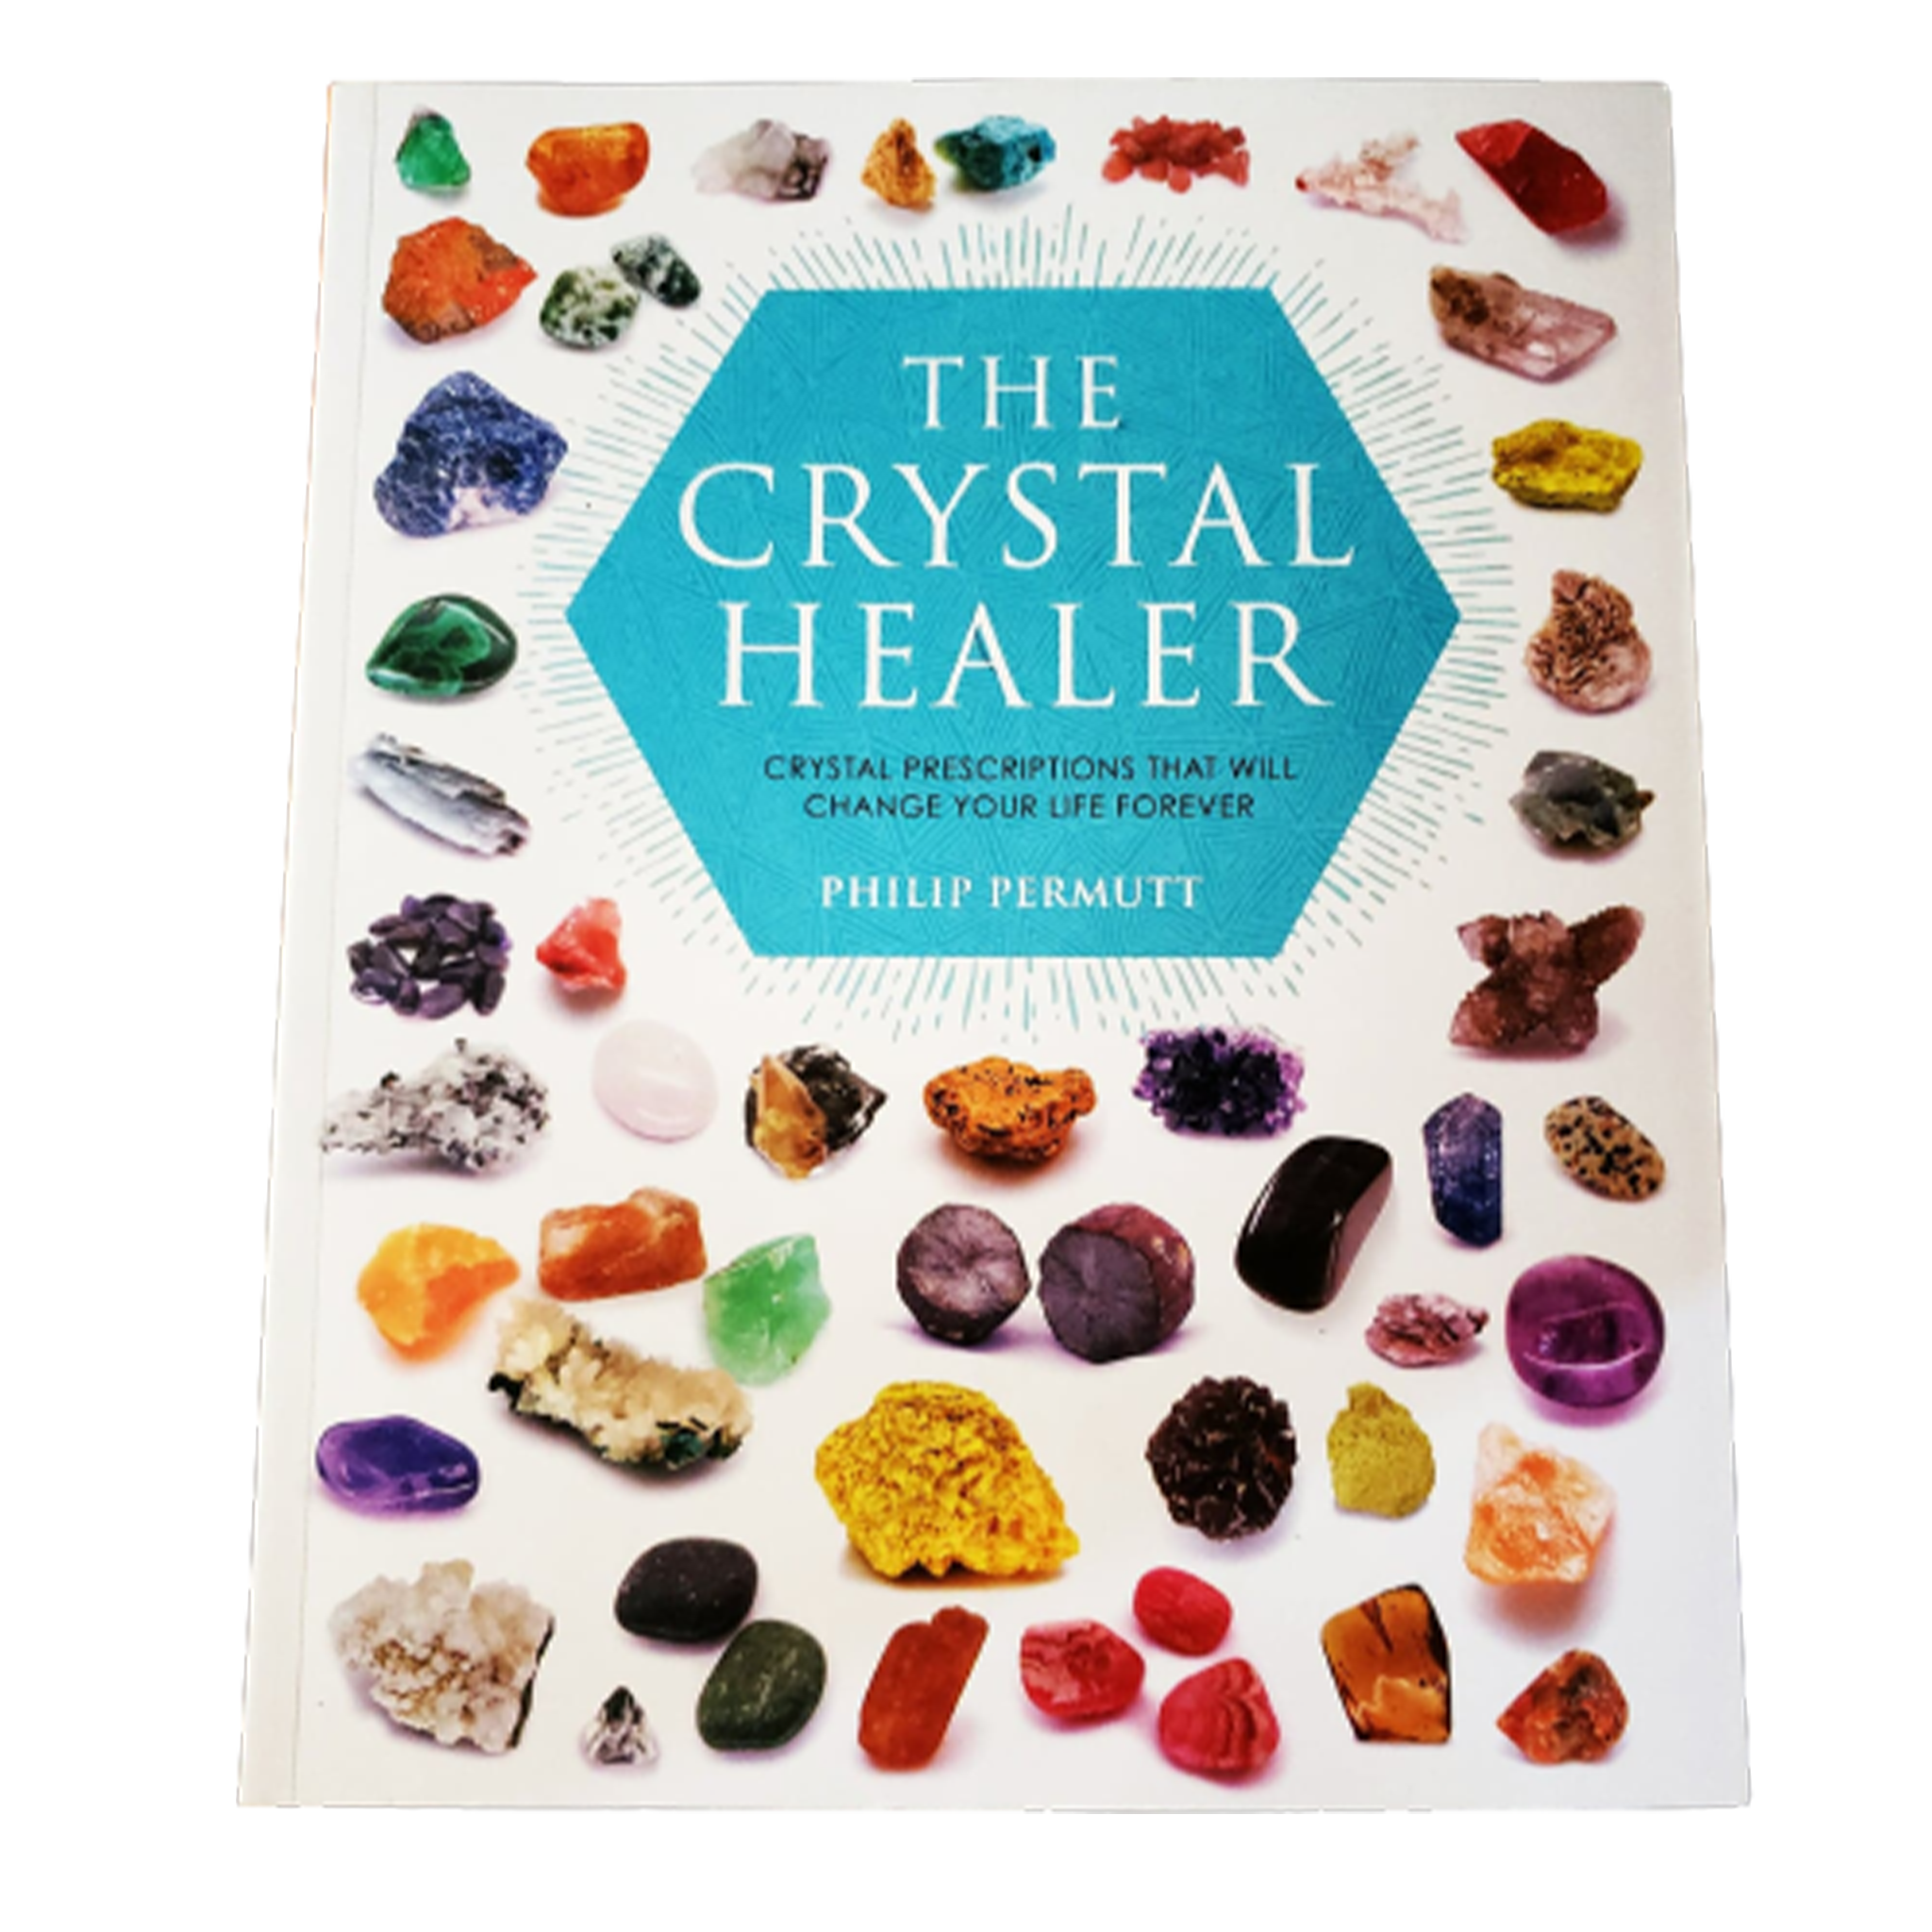 The Crystal Healer  by Philip Permutt